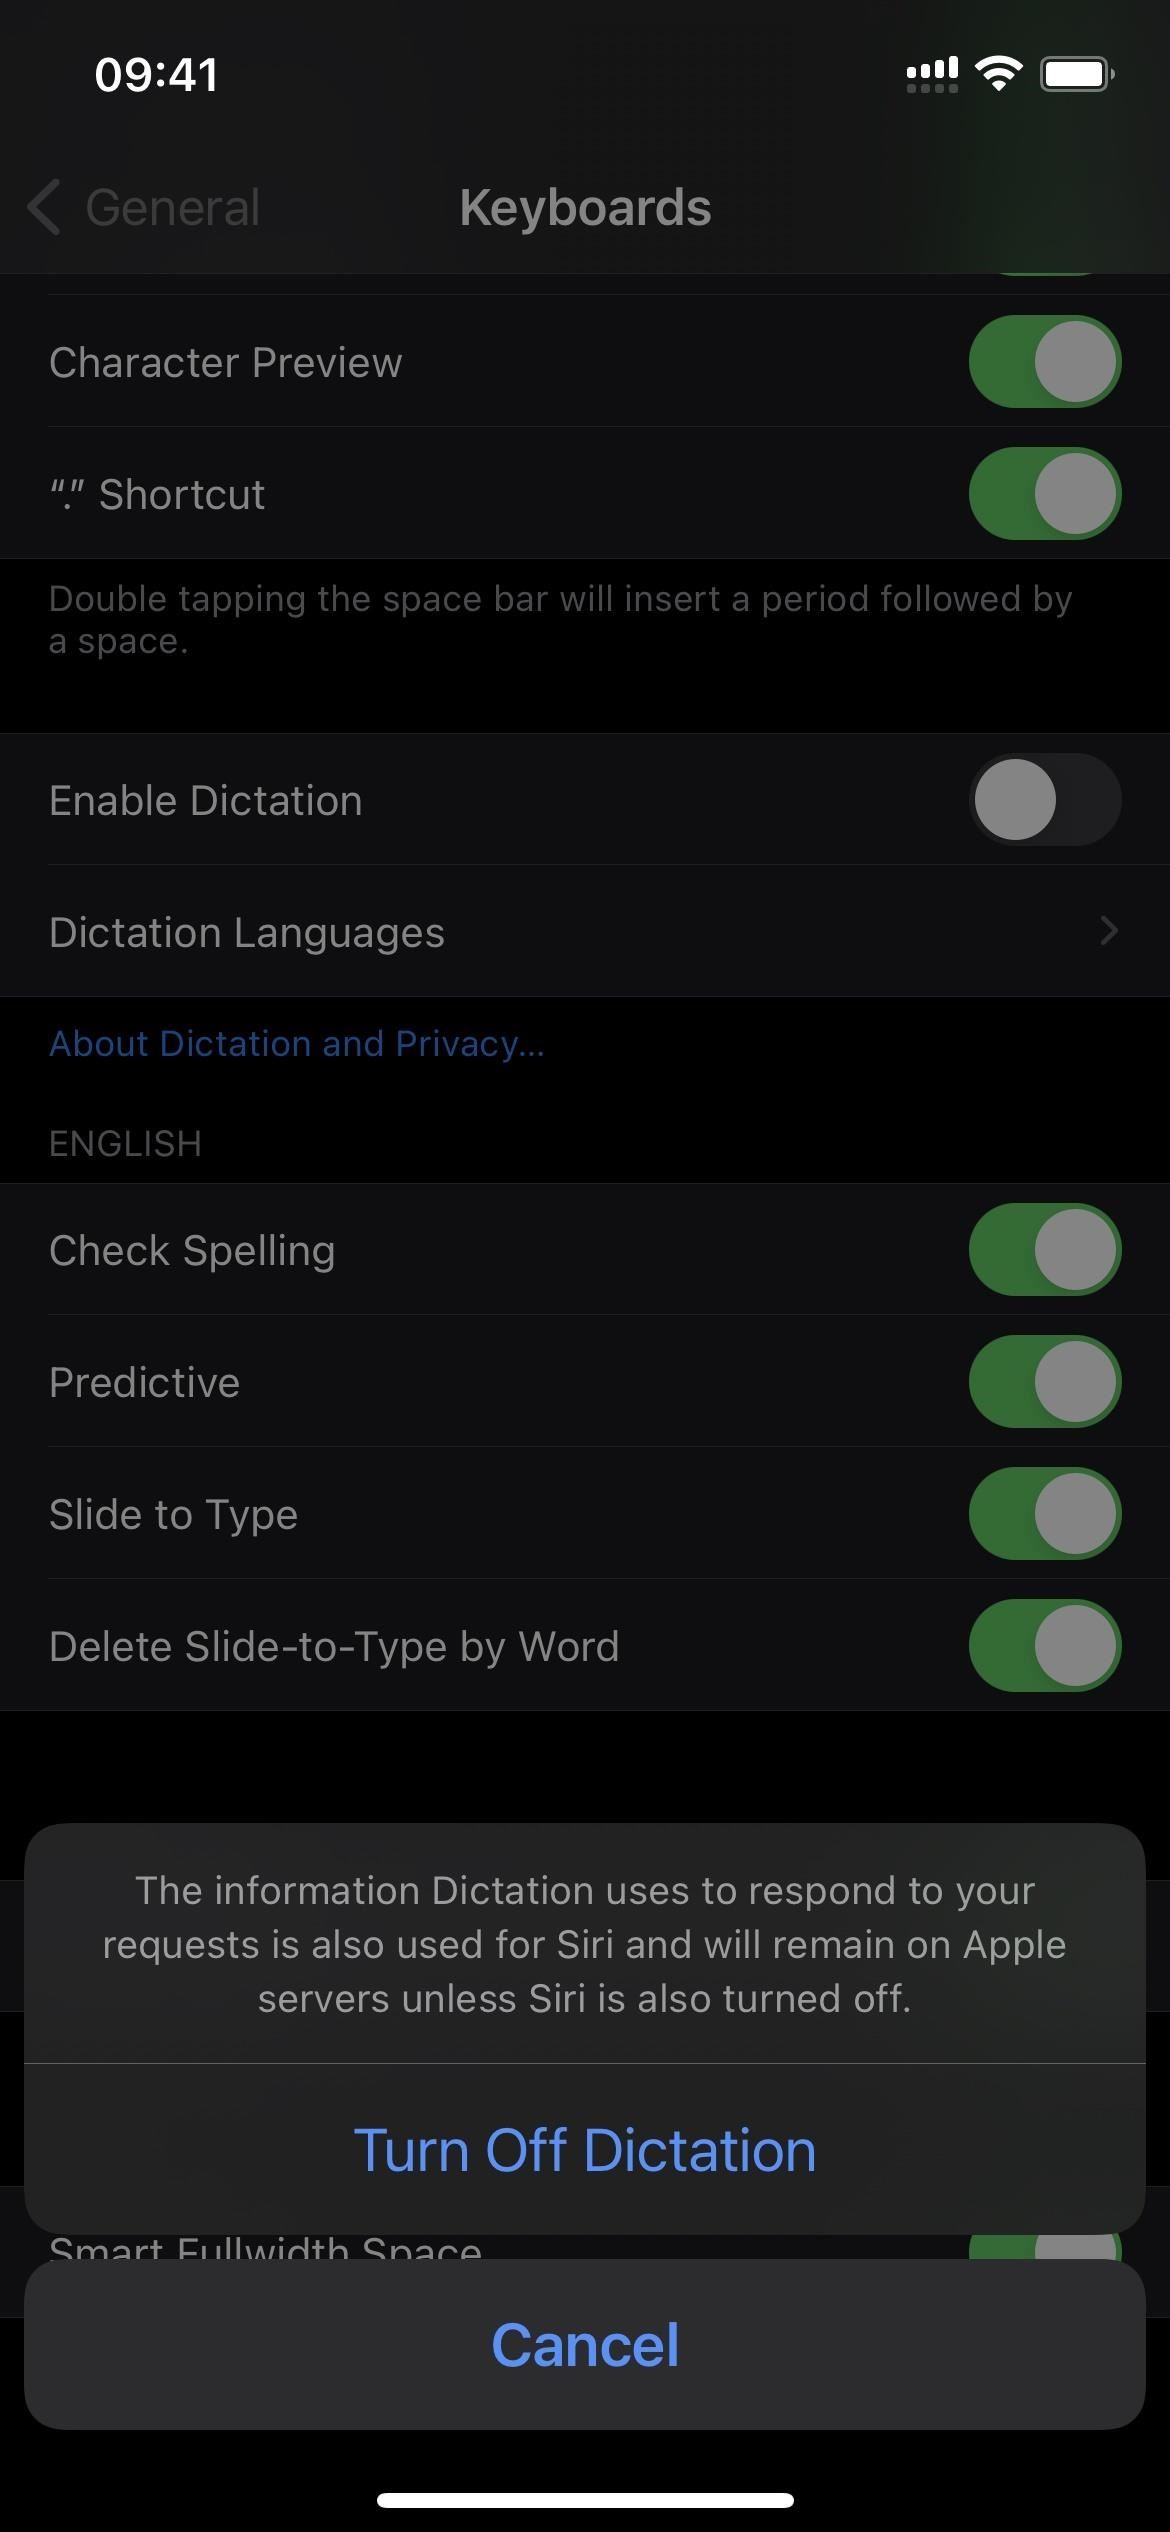 Apple Saves Your Siri & Dictation History — Here's the Easy Way to Delete It